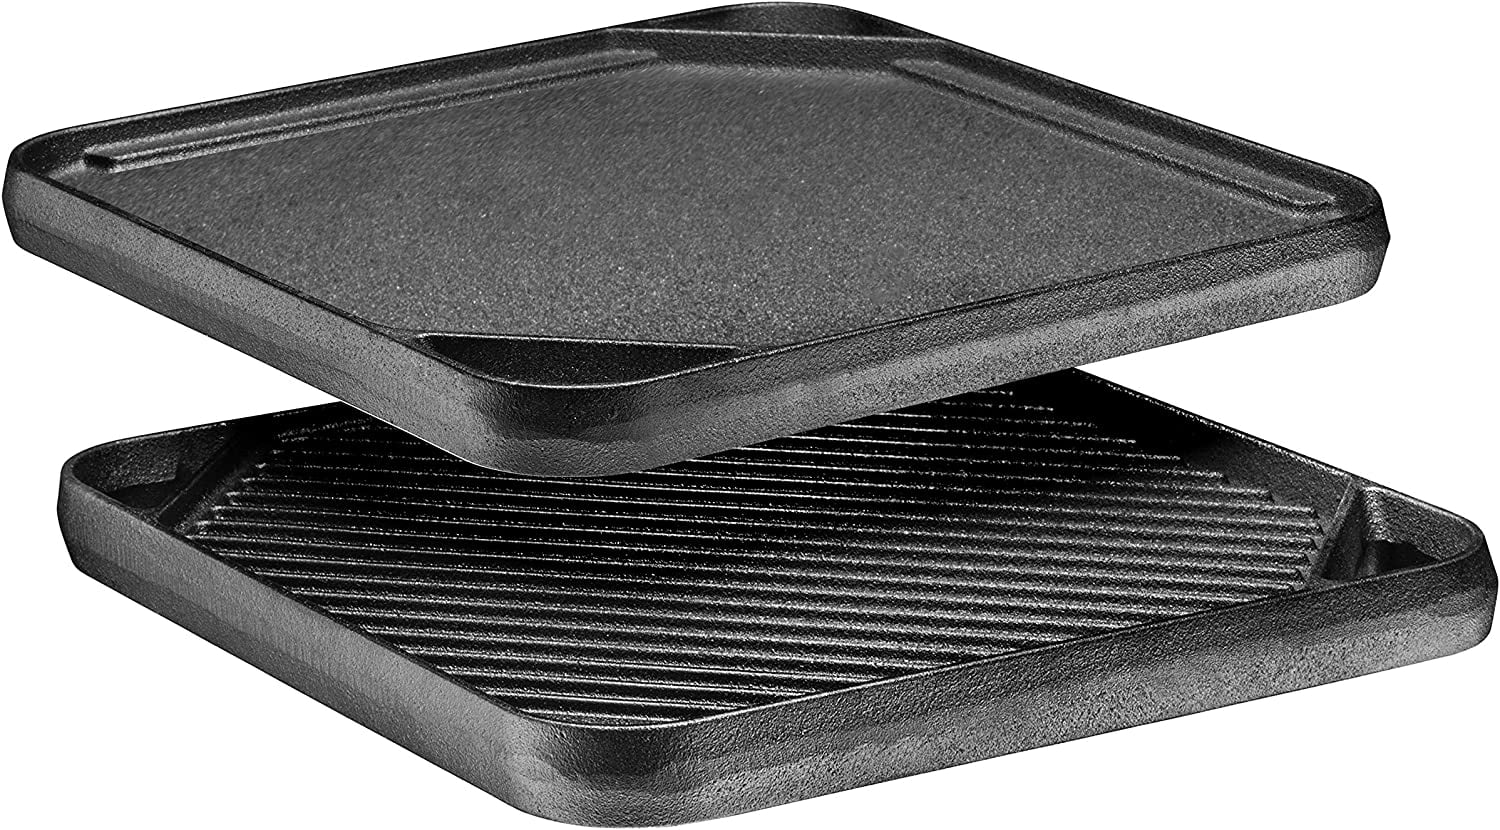  Uno Casa Cast Iron Griddle Grill - 10x20 Inch Pre-Seasoned  Griddle Pan for Stove Top, Two Sided, Natural Non-Stick Grill Griddle -  Chainmail Cleaner Included: Home & Kitchen